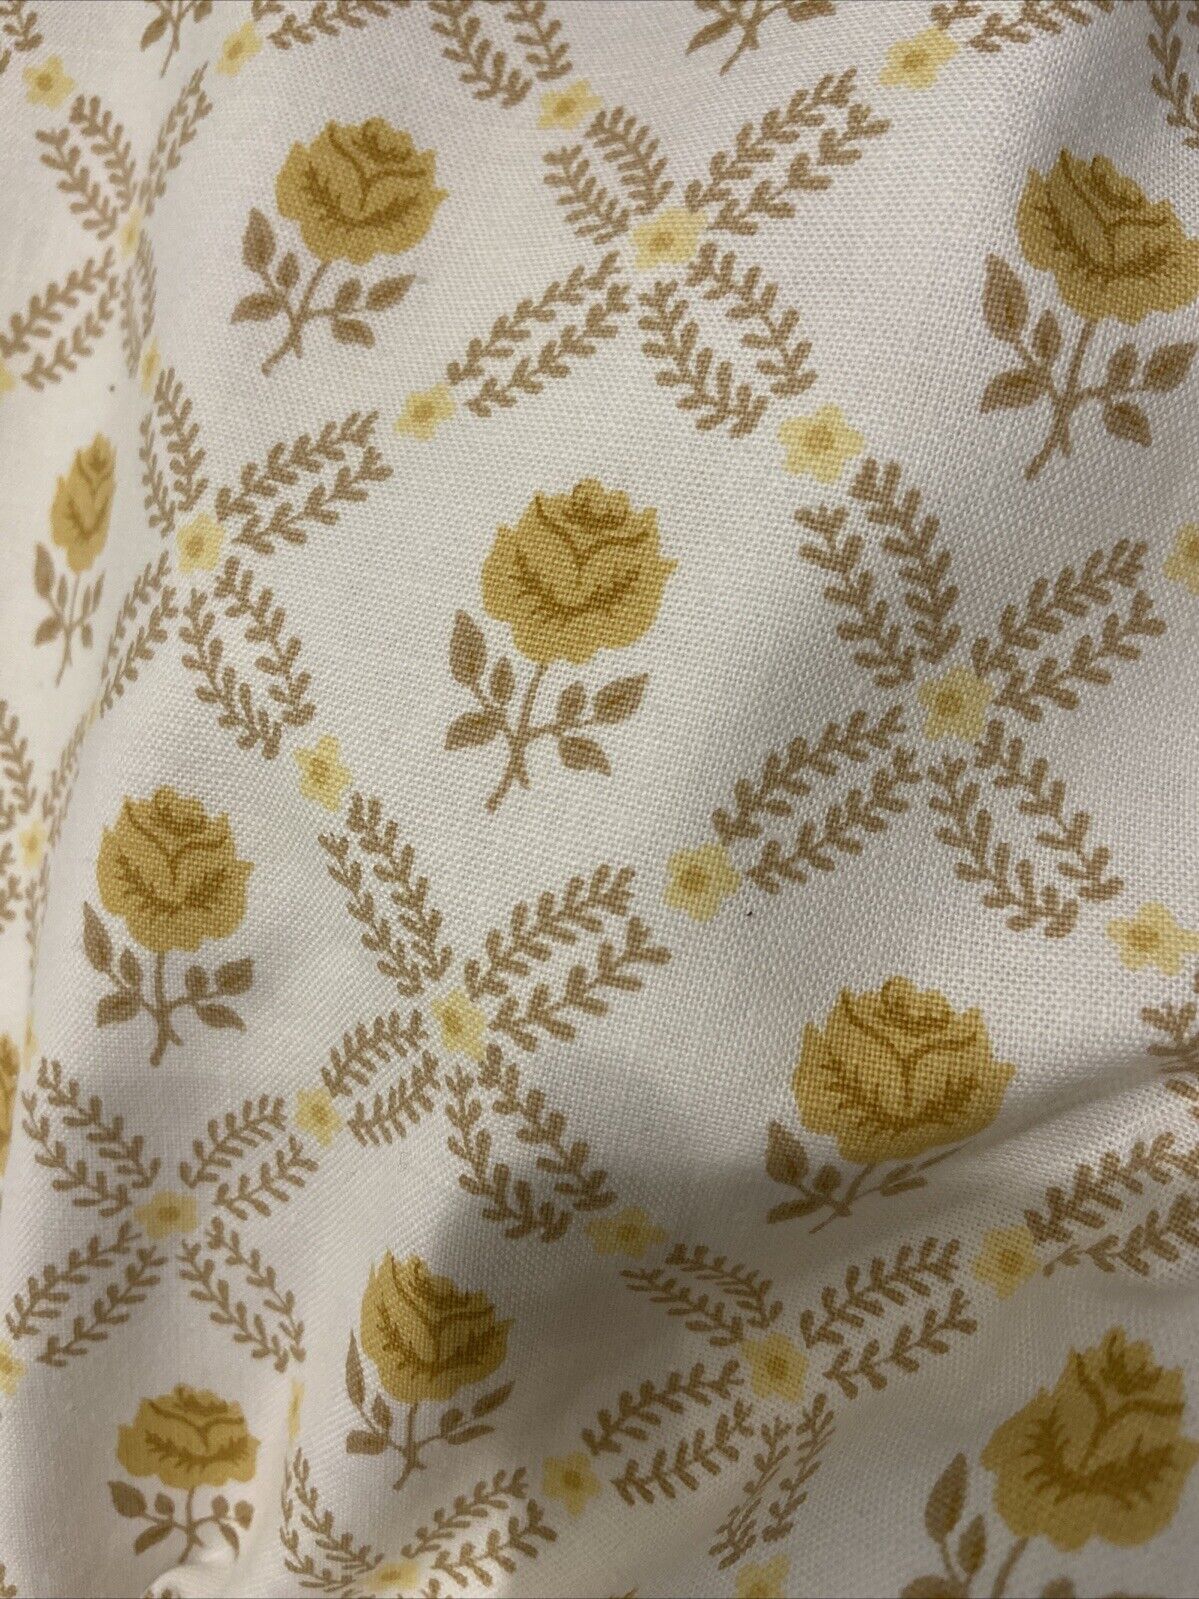 Melody Mills Fabric Vintage Cotton Reflections Cream Yellow Gold Floral 2.5X1.3M